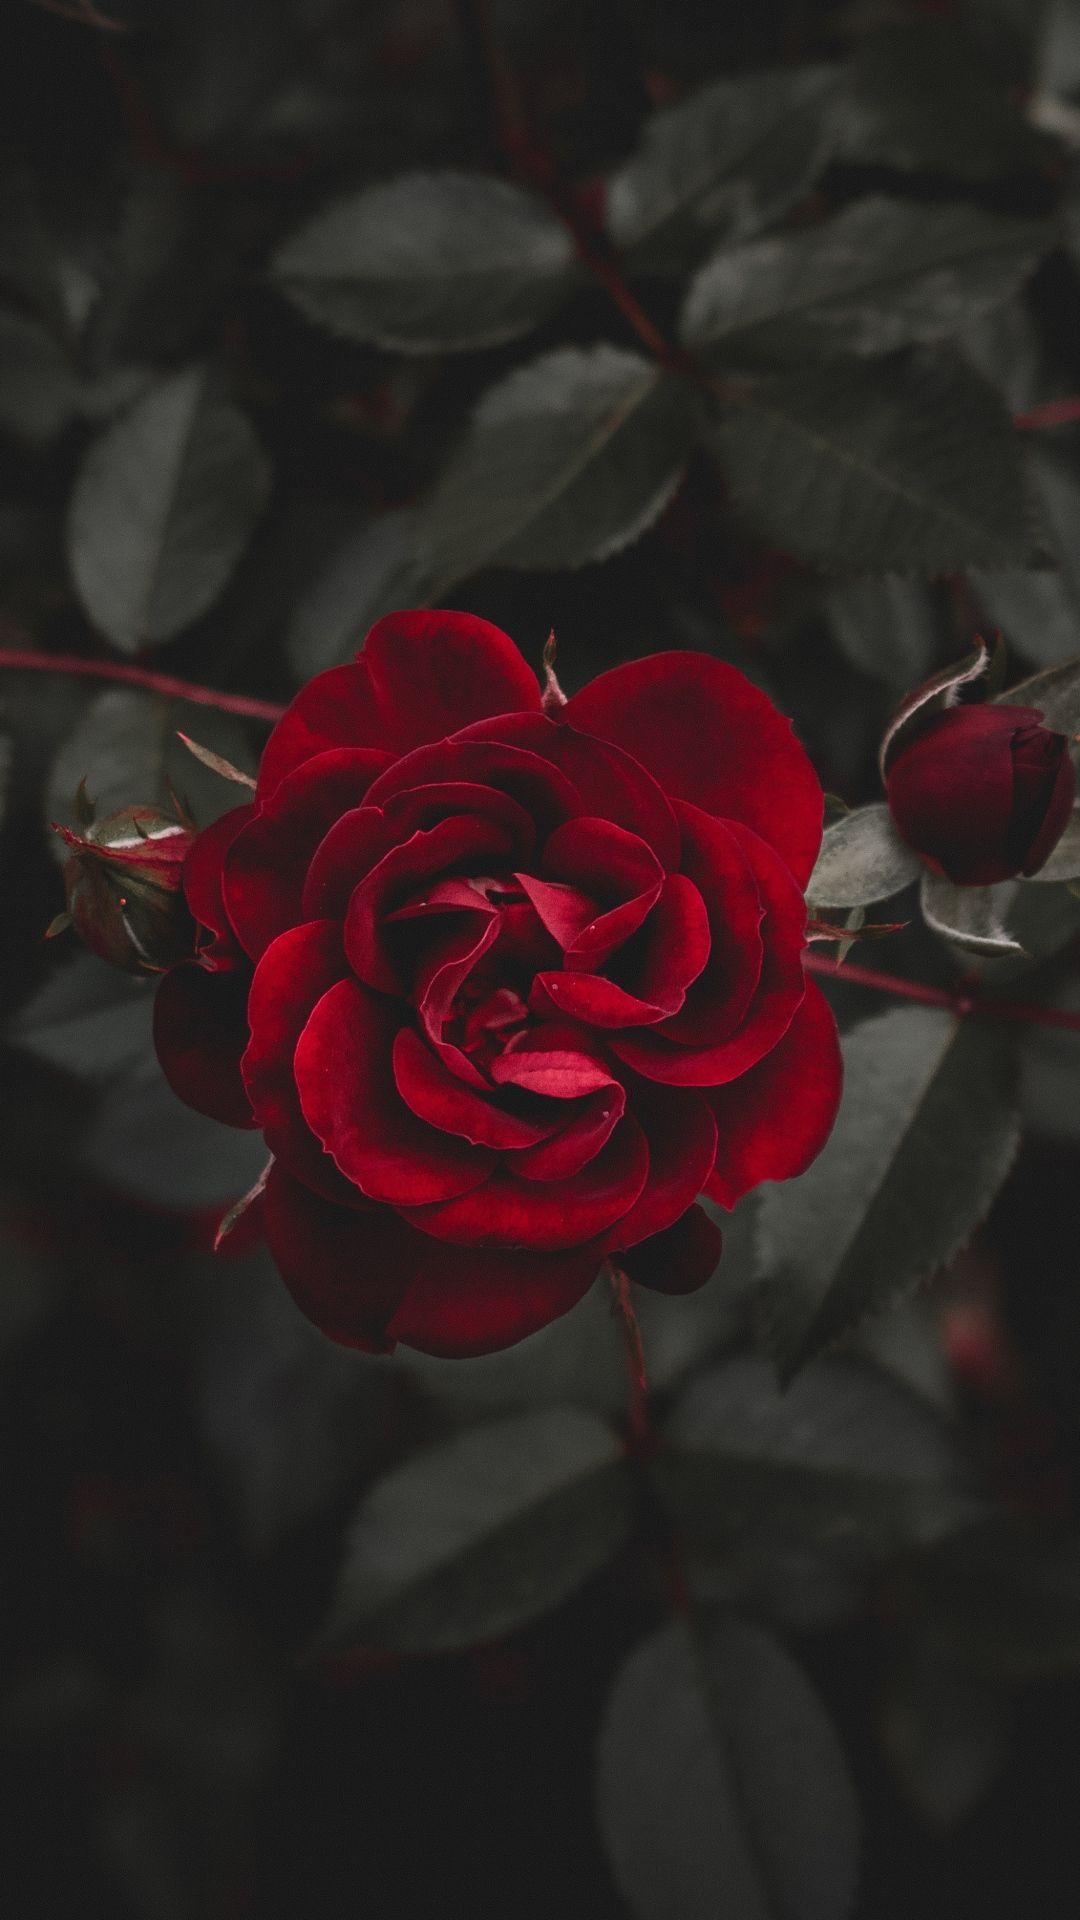 Premium AI Image  Red roses wallpapers for iphone and android the best  high definition iphone wallpapers for iphone and android red roses  wallpaper red roses wallpaper iphone wallpaper iphone